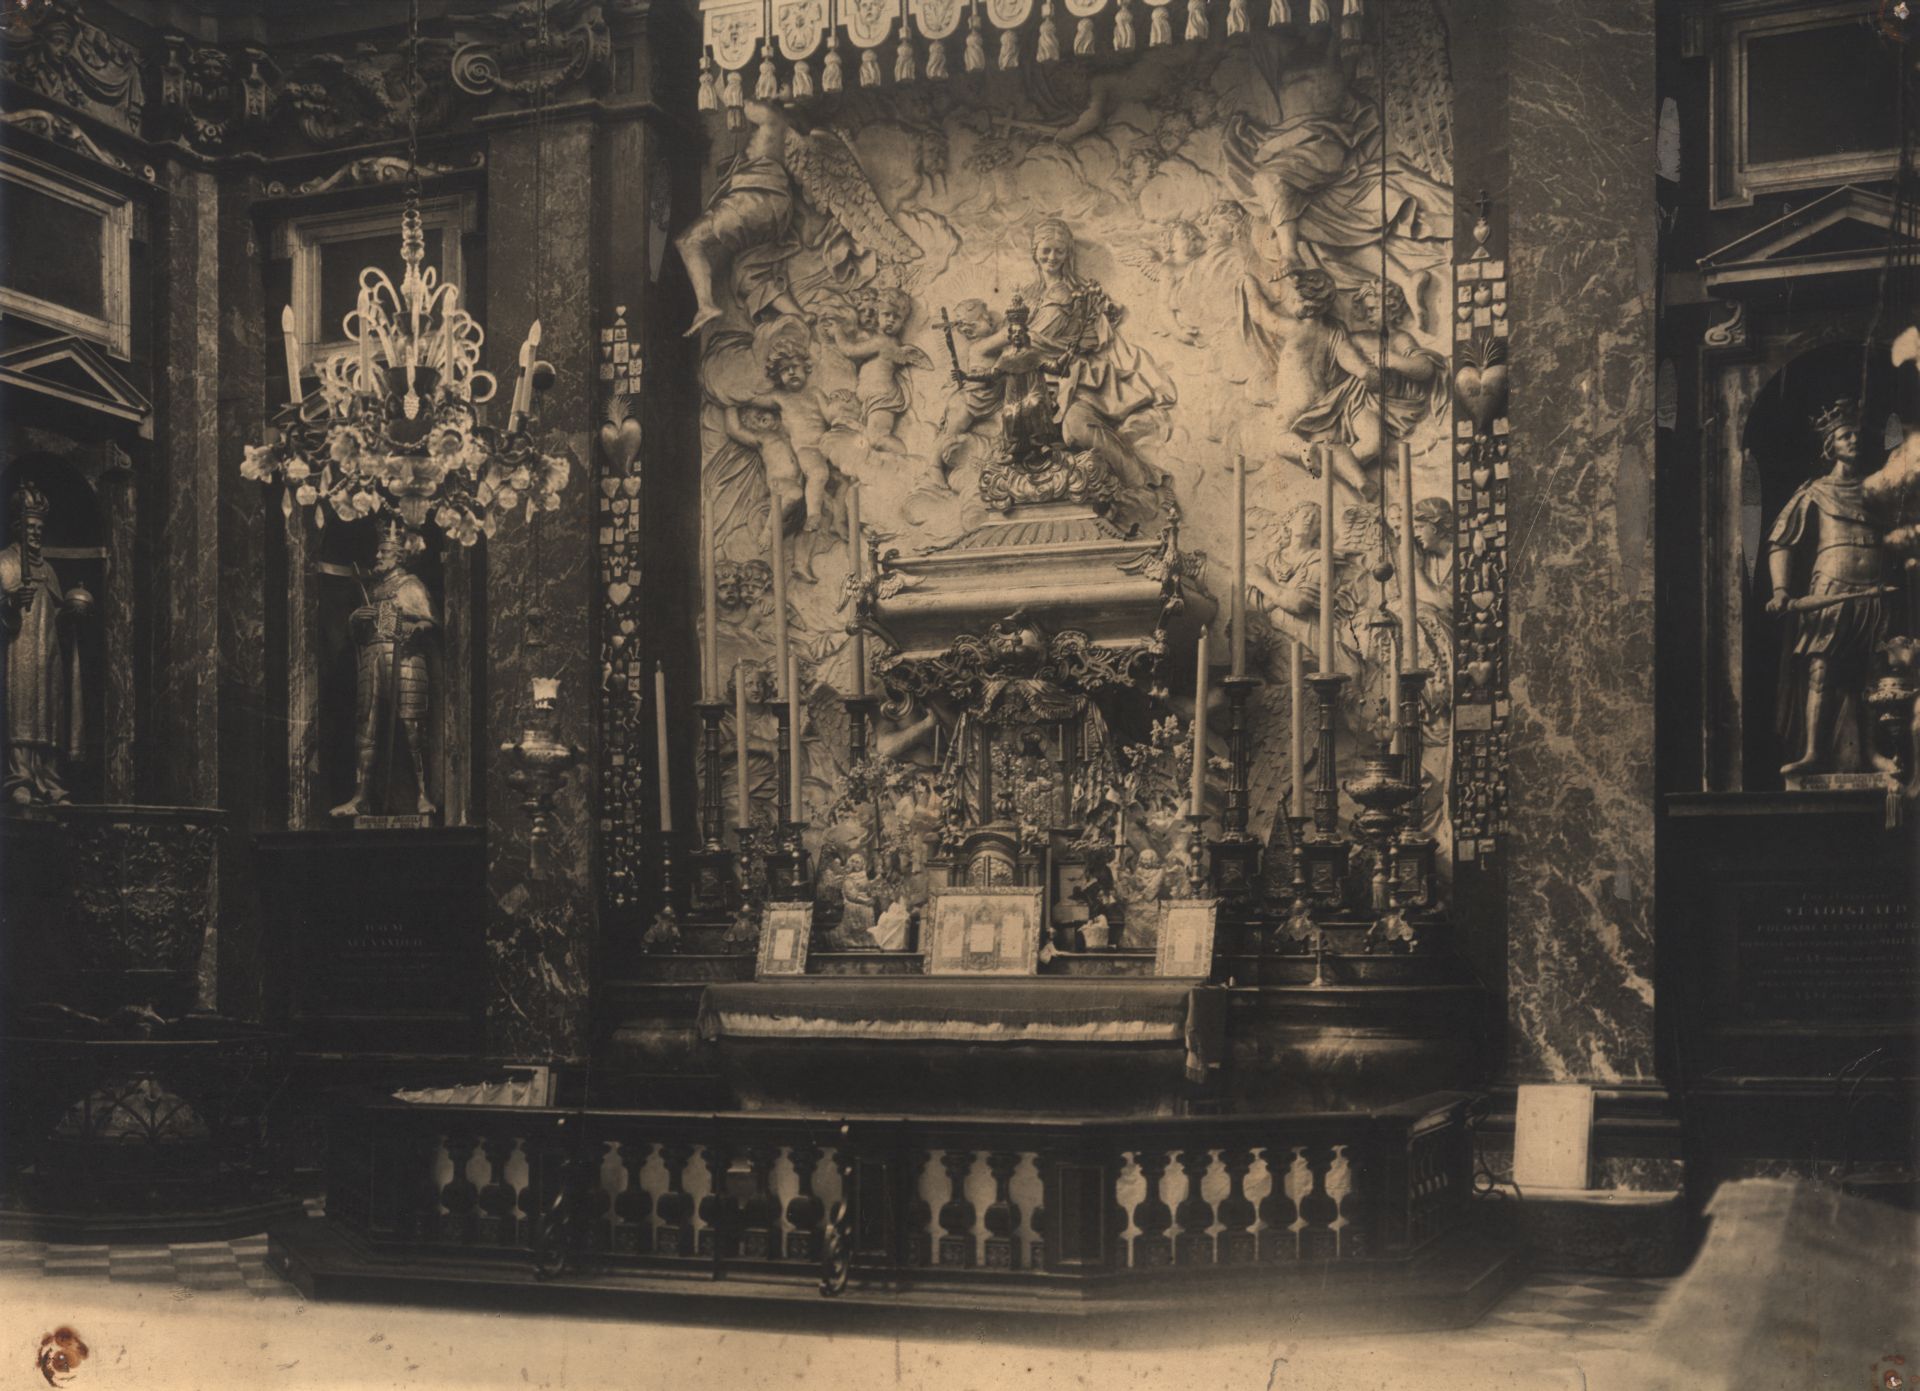 Chandelier at the Chapel of Saint Casimir of the Cathedral Basilica of Vilnius. Photo by Jan Bułhak, 1931, in: Lietuvos dailės muziejus, inv. Nr. Fi-106